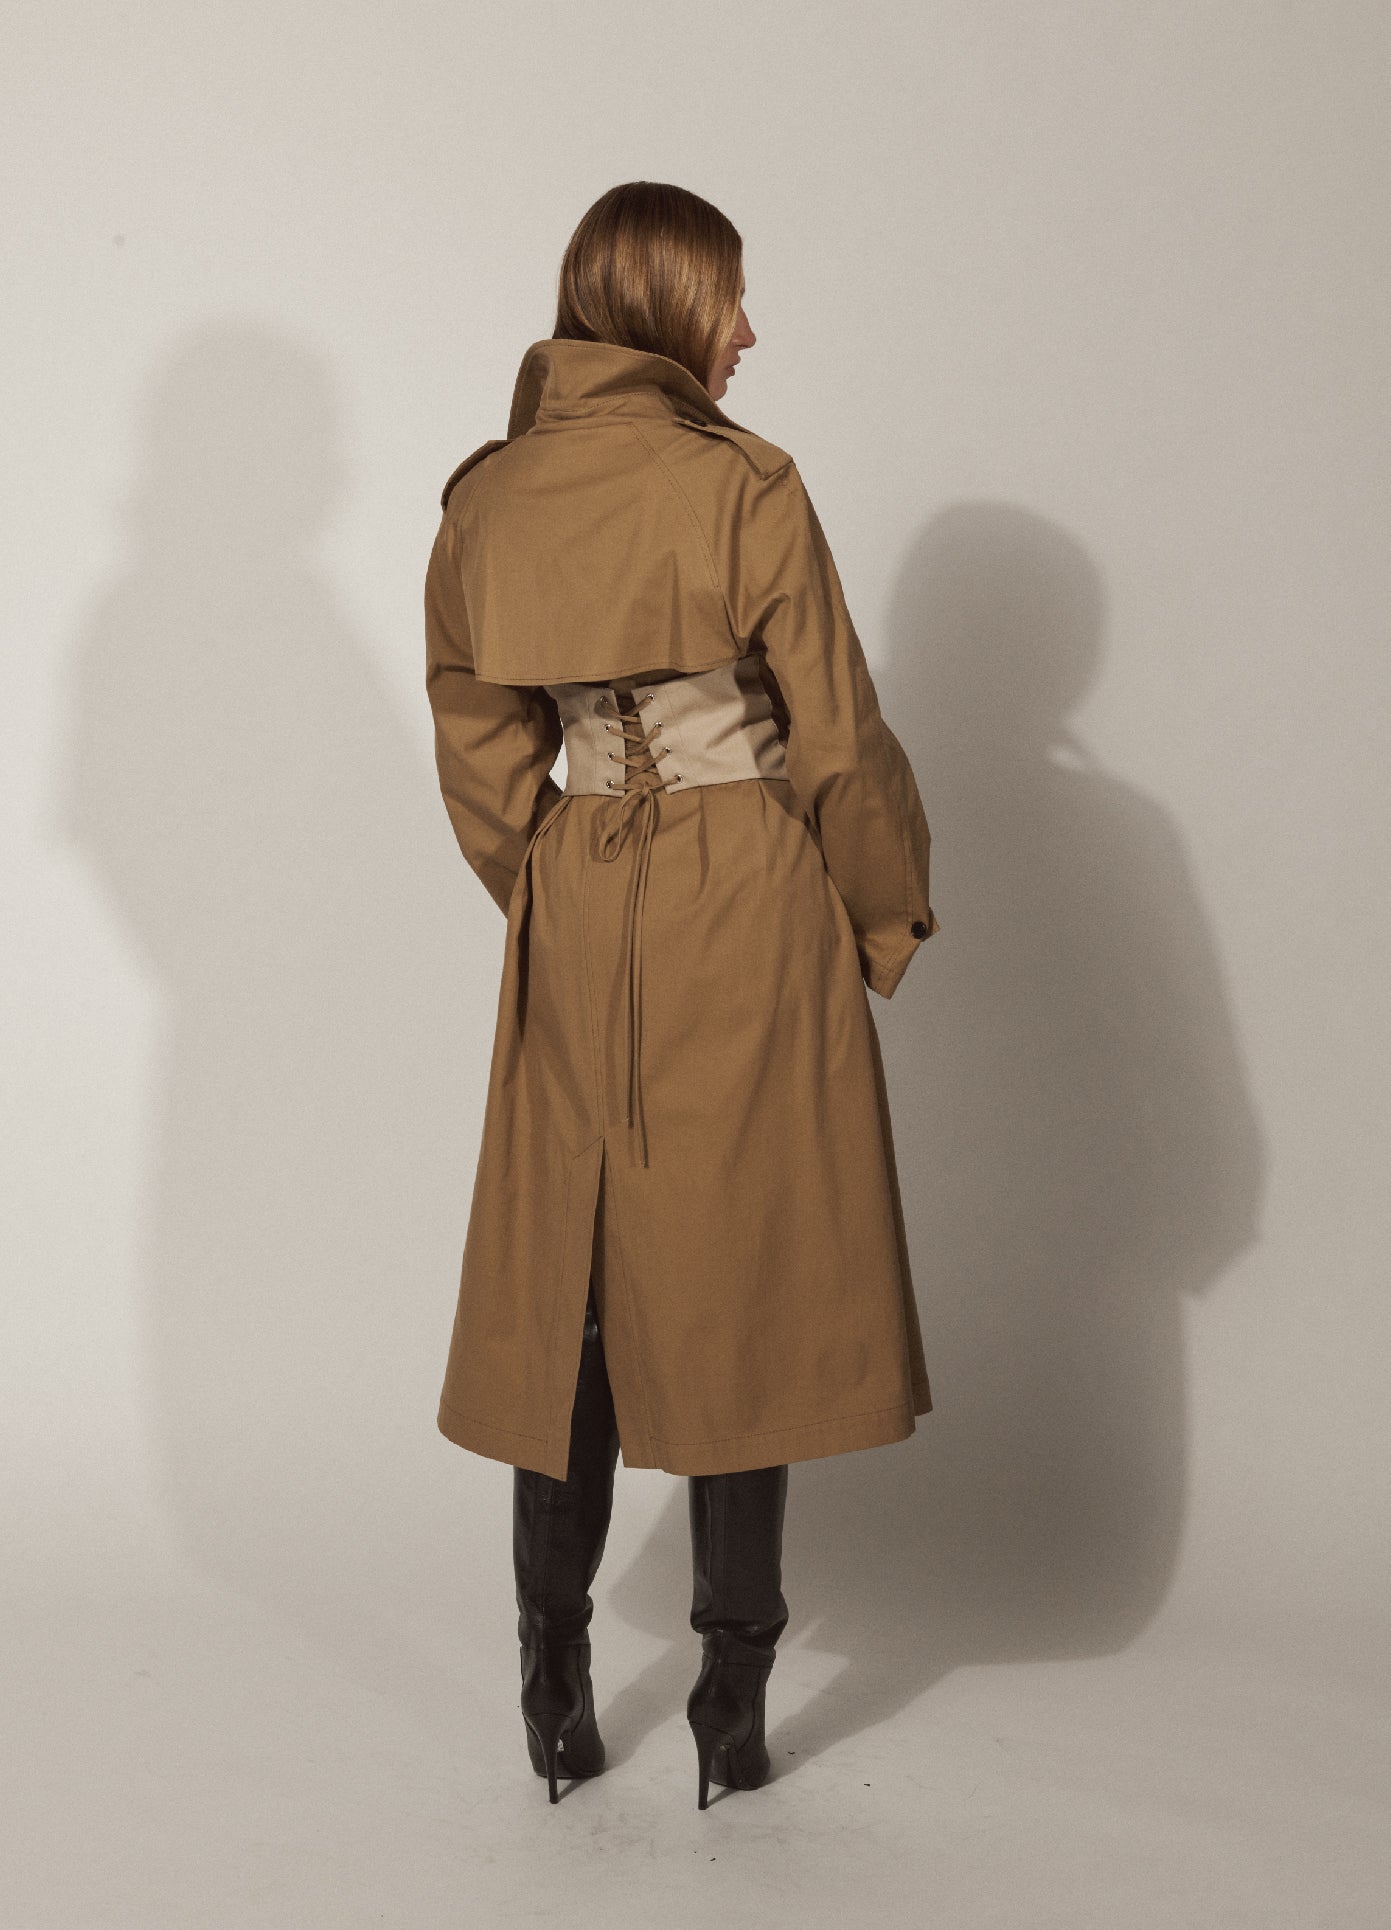 MONSE Bustier Trench Coat in Khaki and Beige on Model Lookbook Back View